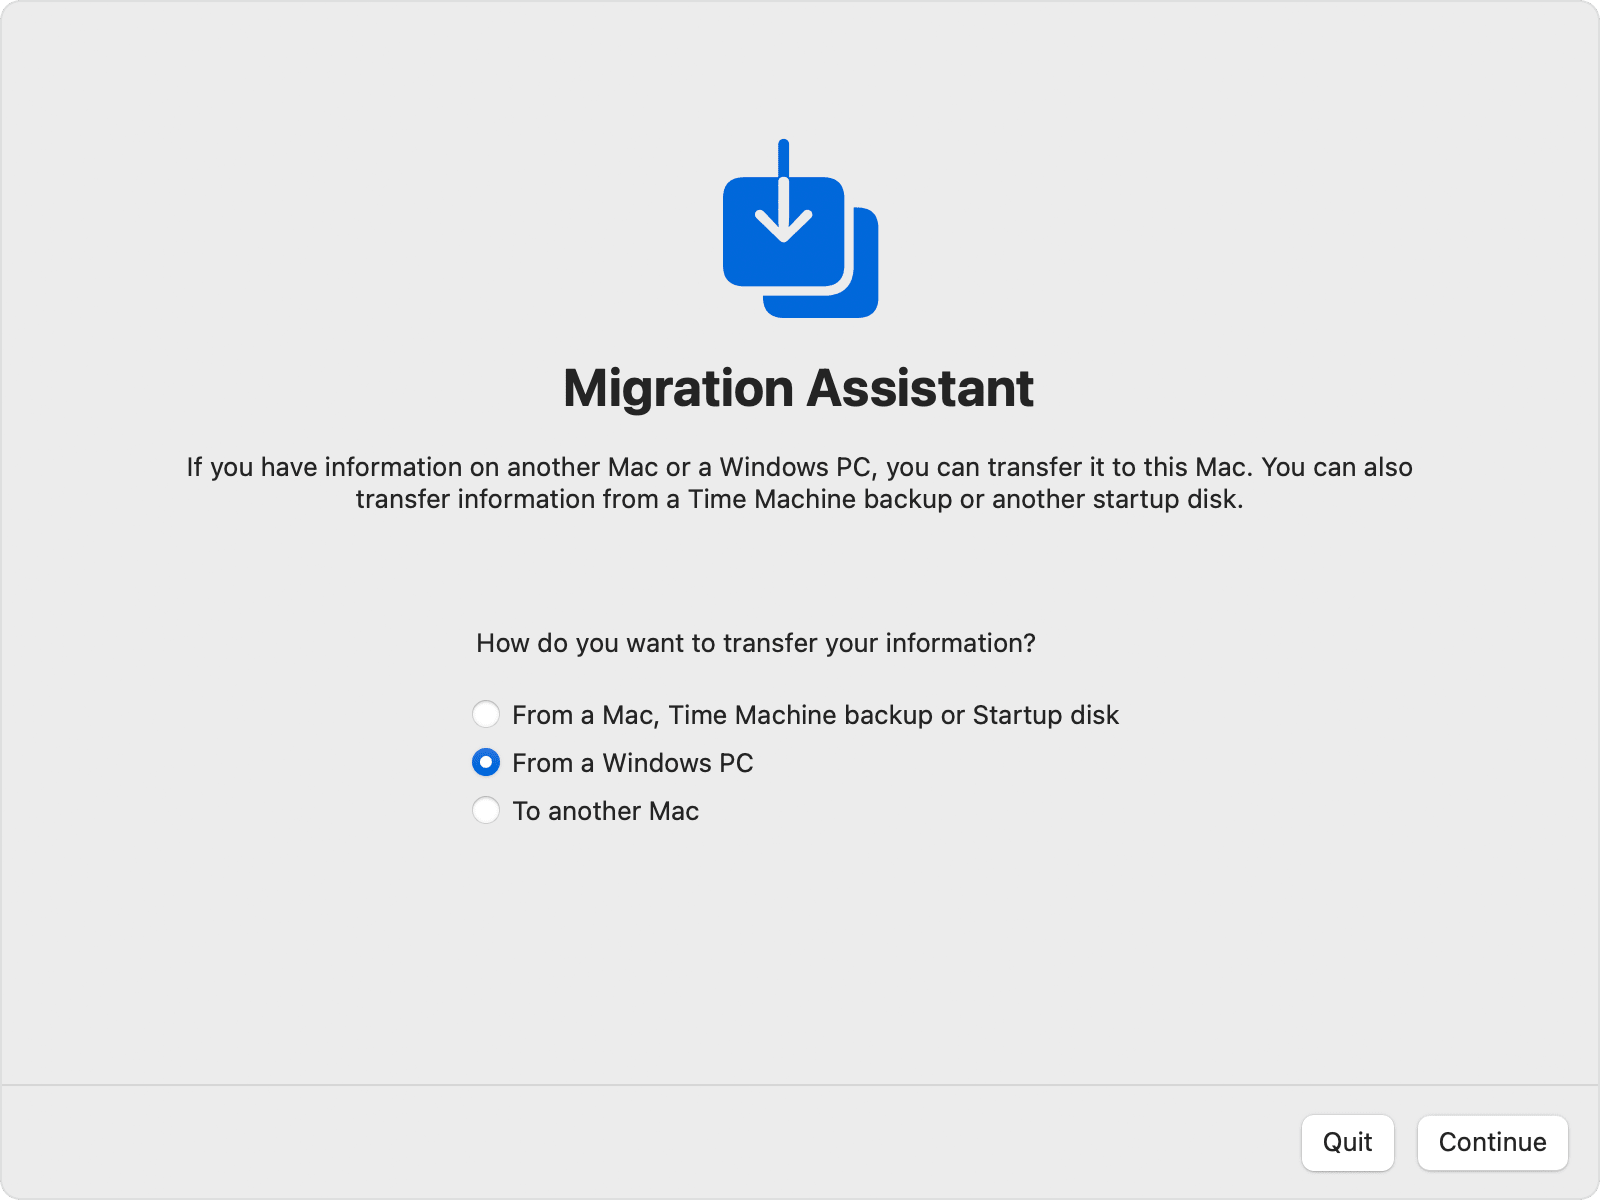 Migration Assistant transfer from Windows PC